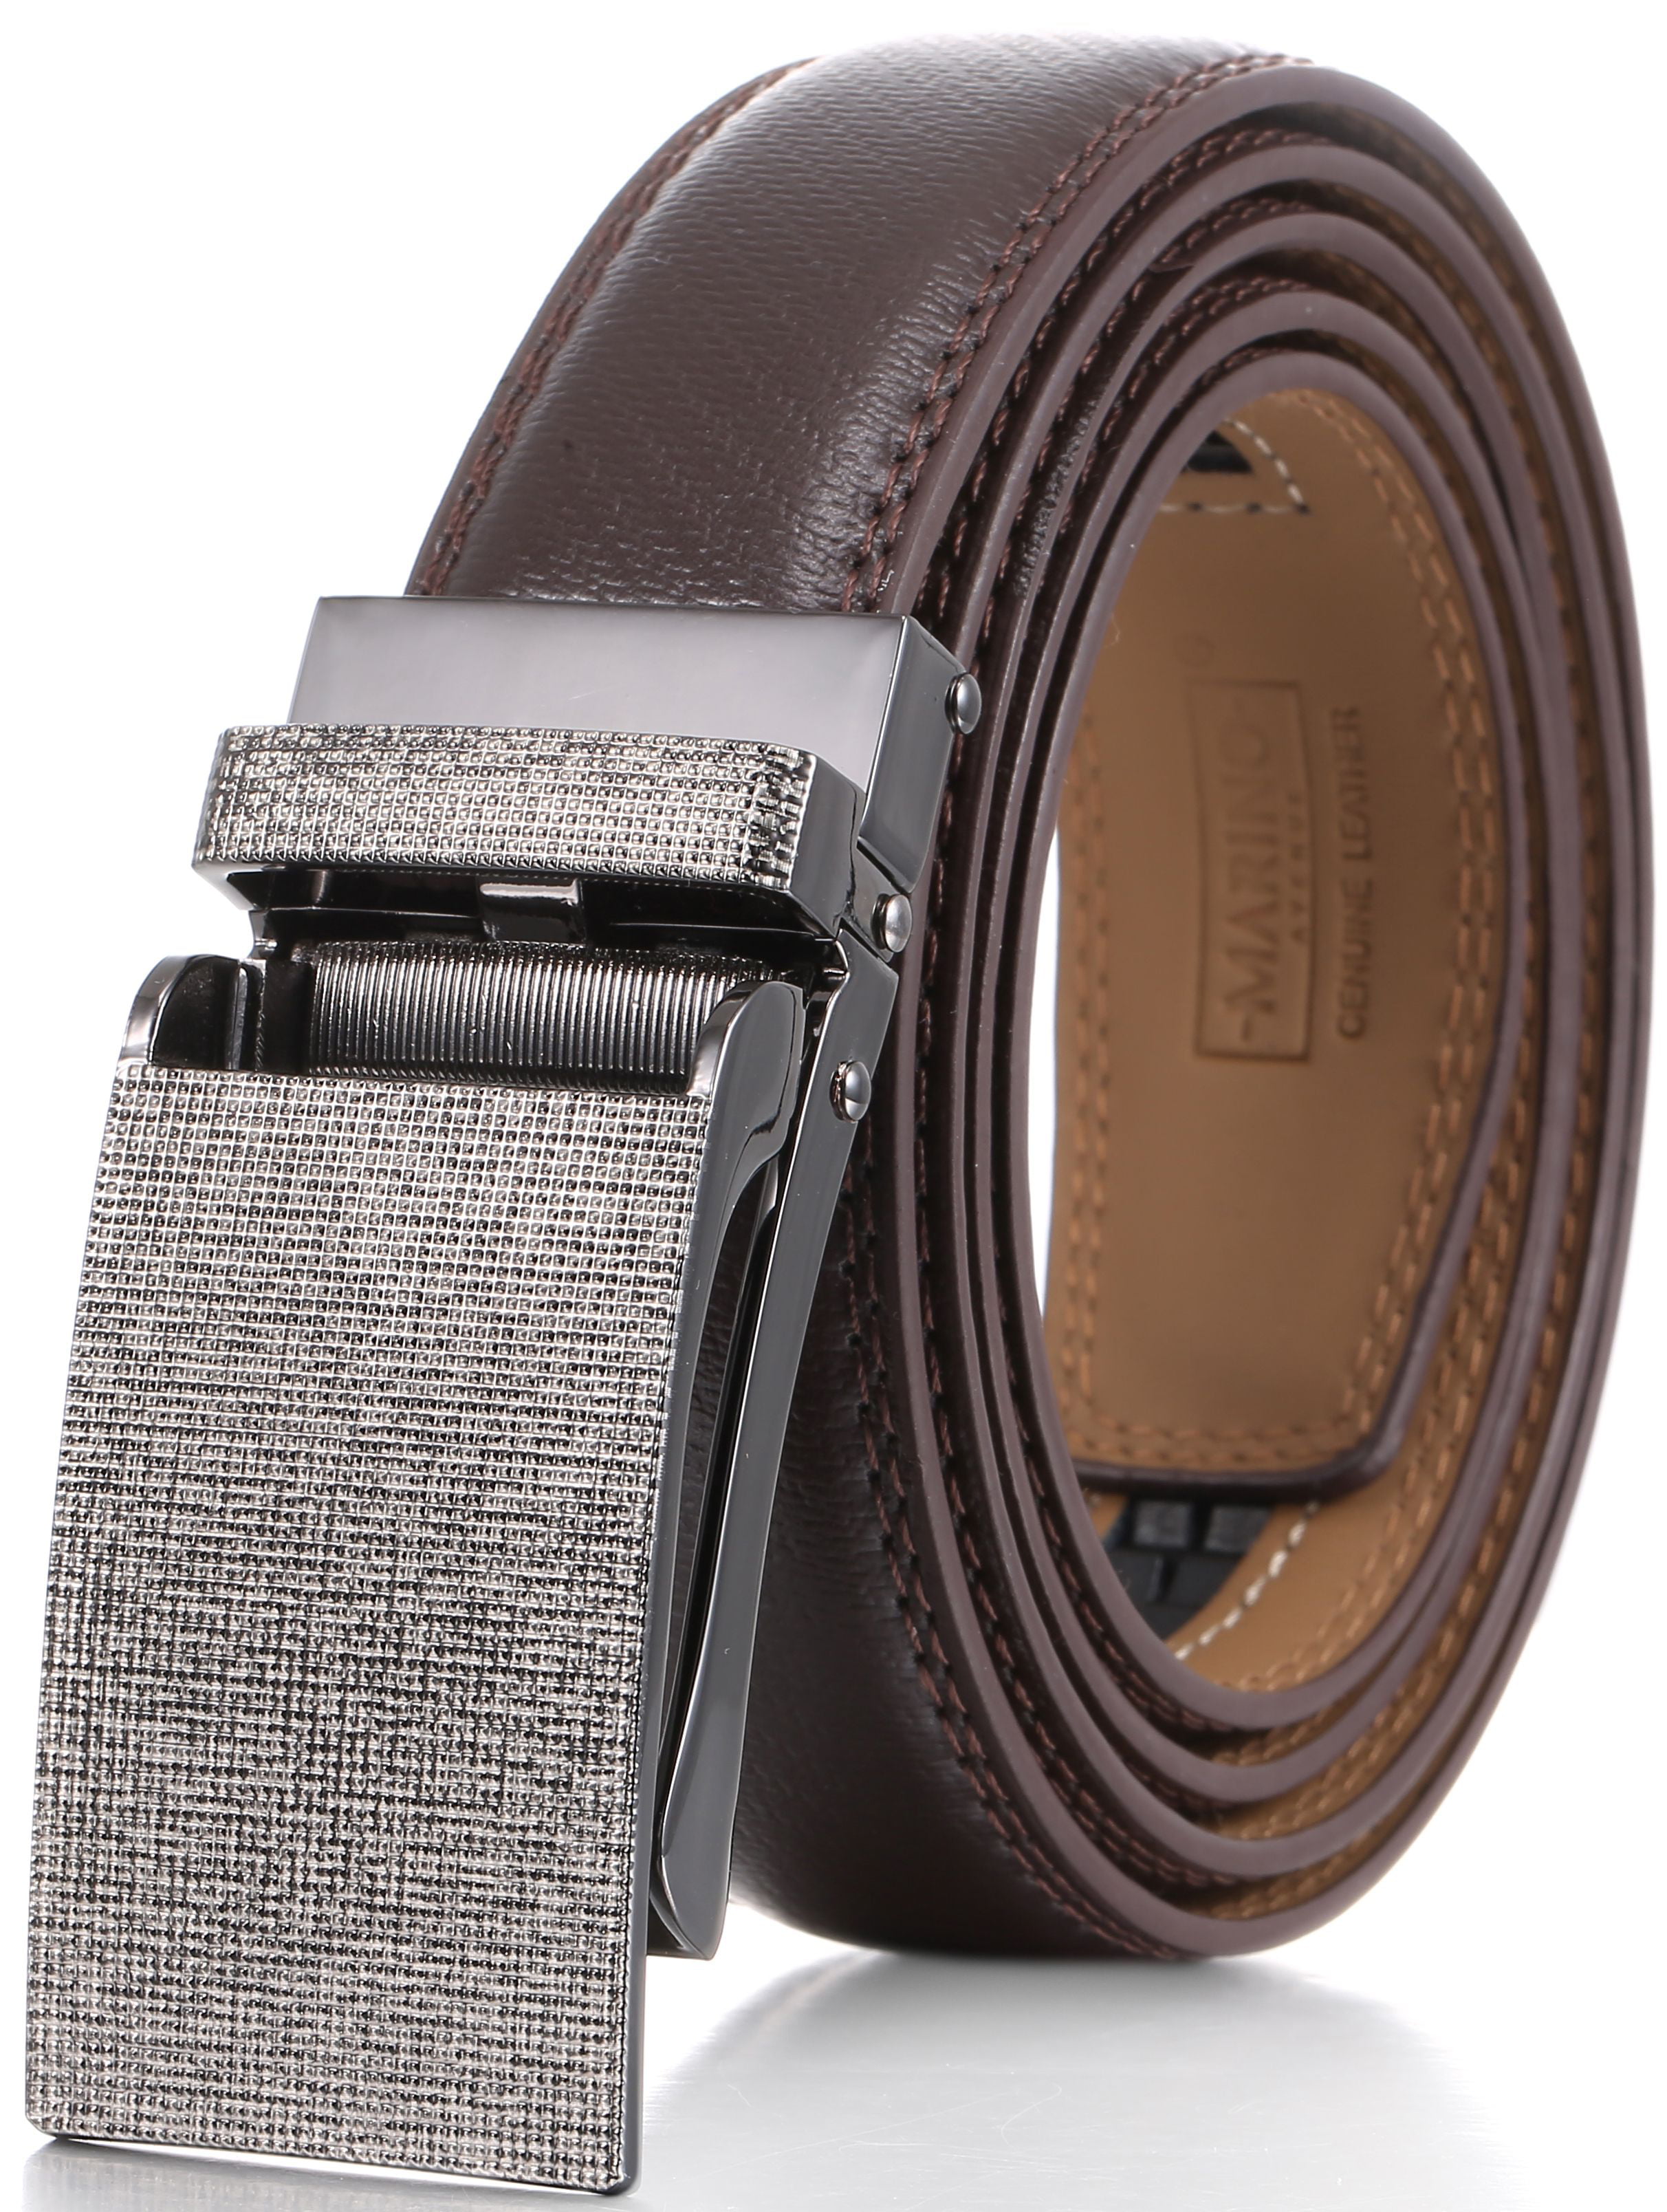 Buckle Mens Belts Automatic Ratchet Black Leather Waist Strap Western Gift Boxs 